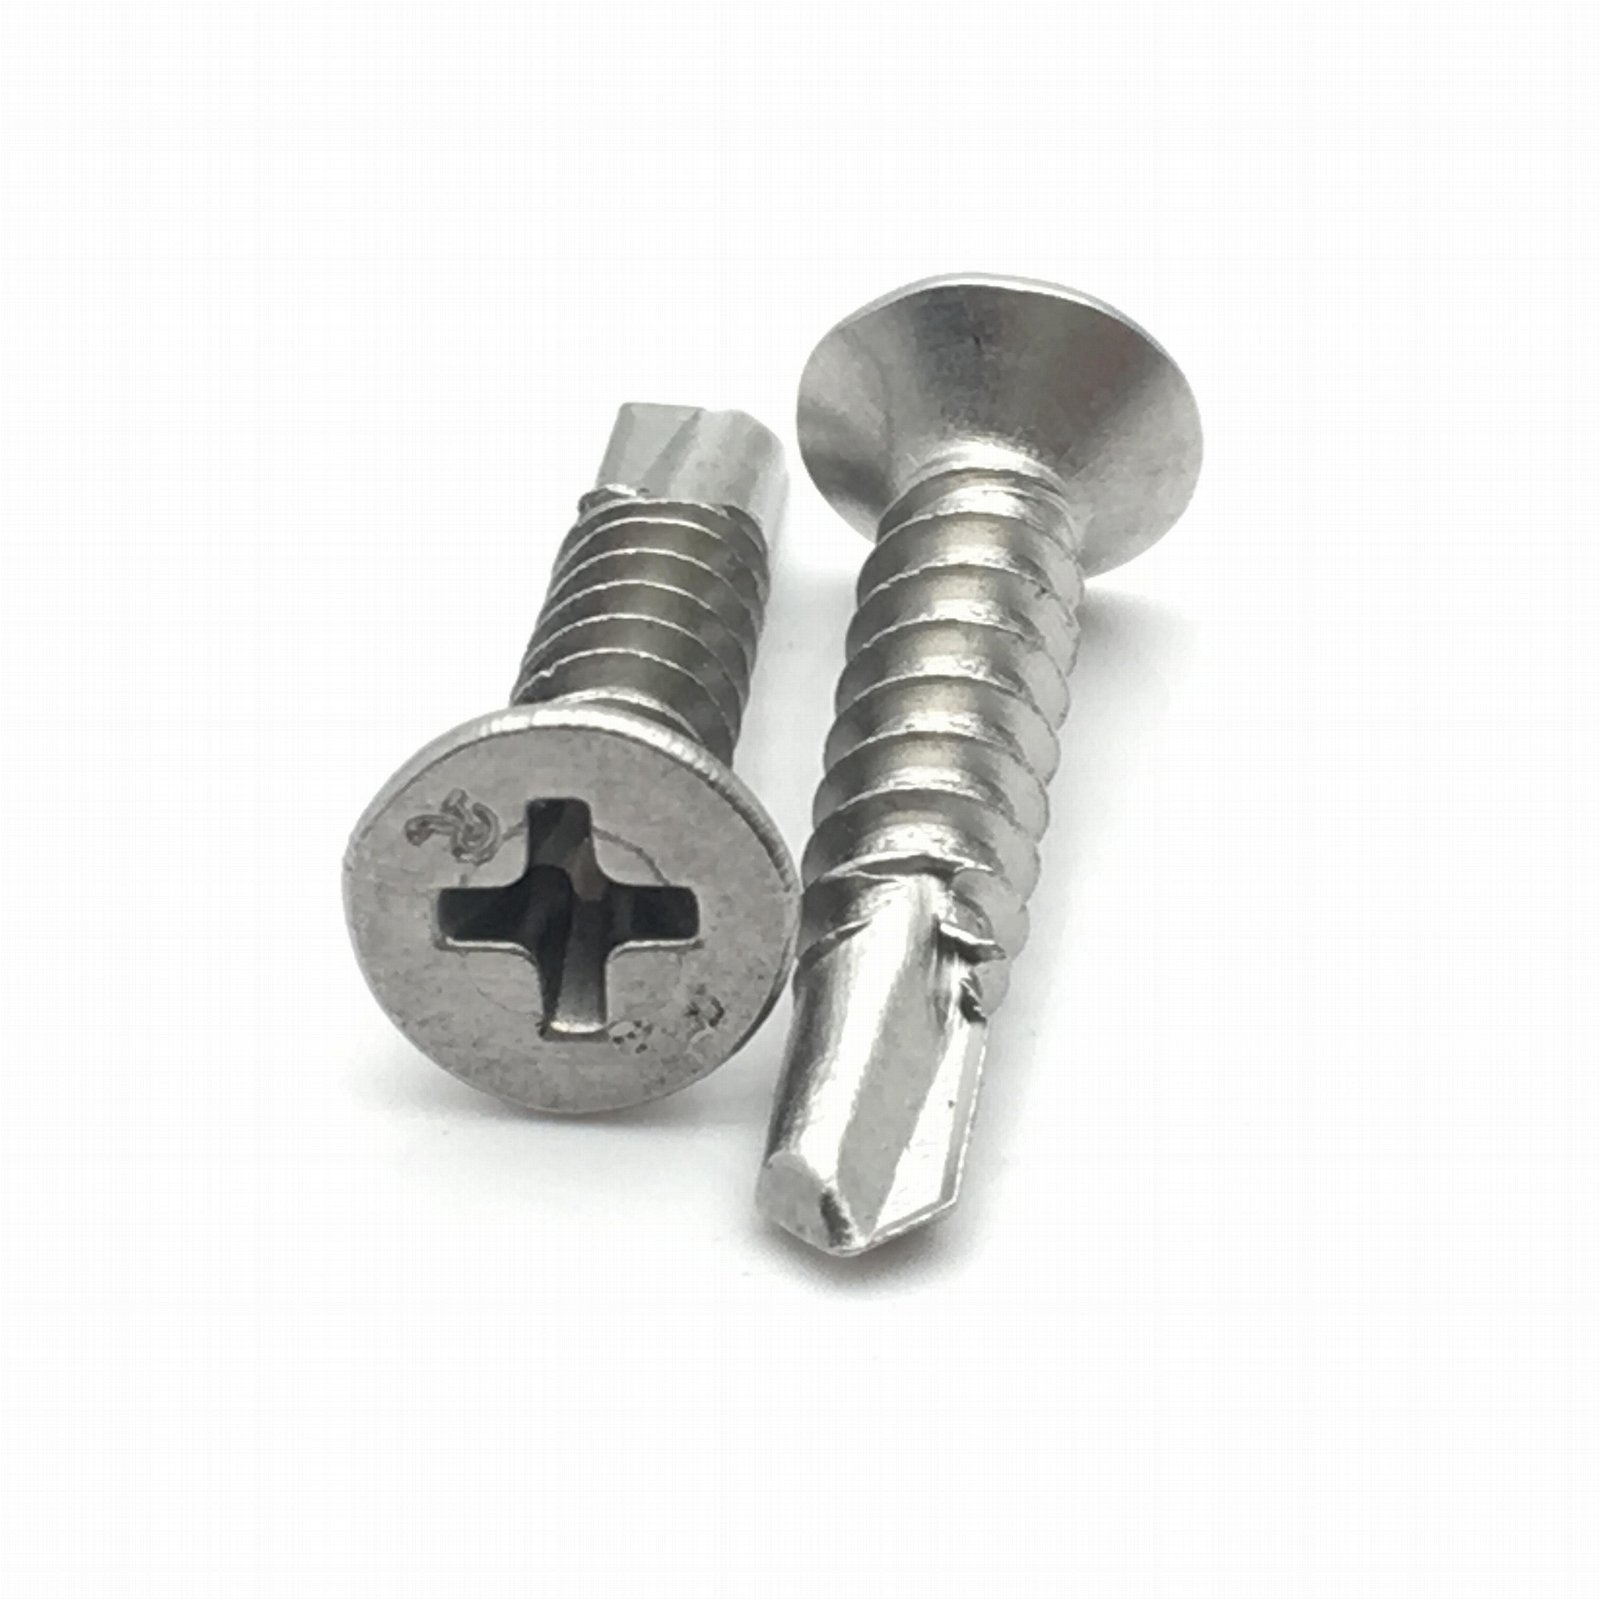 SS410 stainless steel flat head countersunk phillip self drilling screw 2